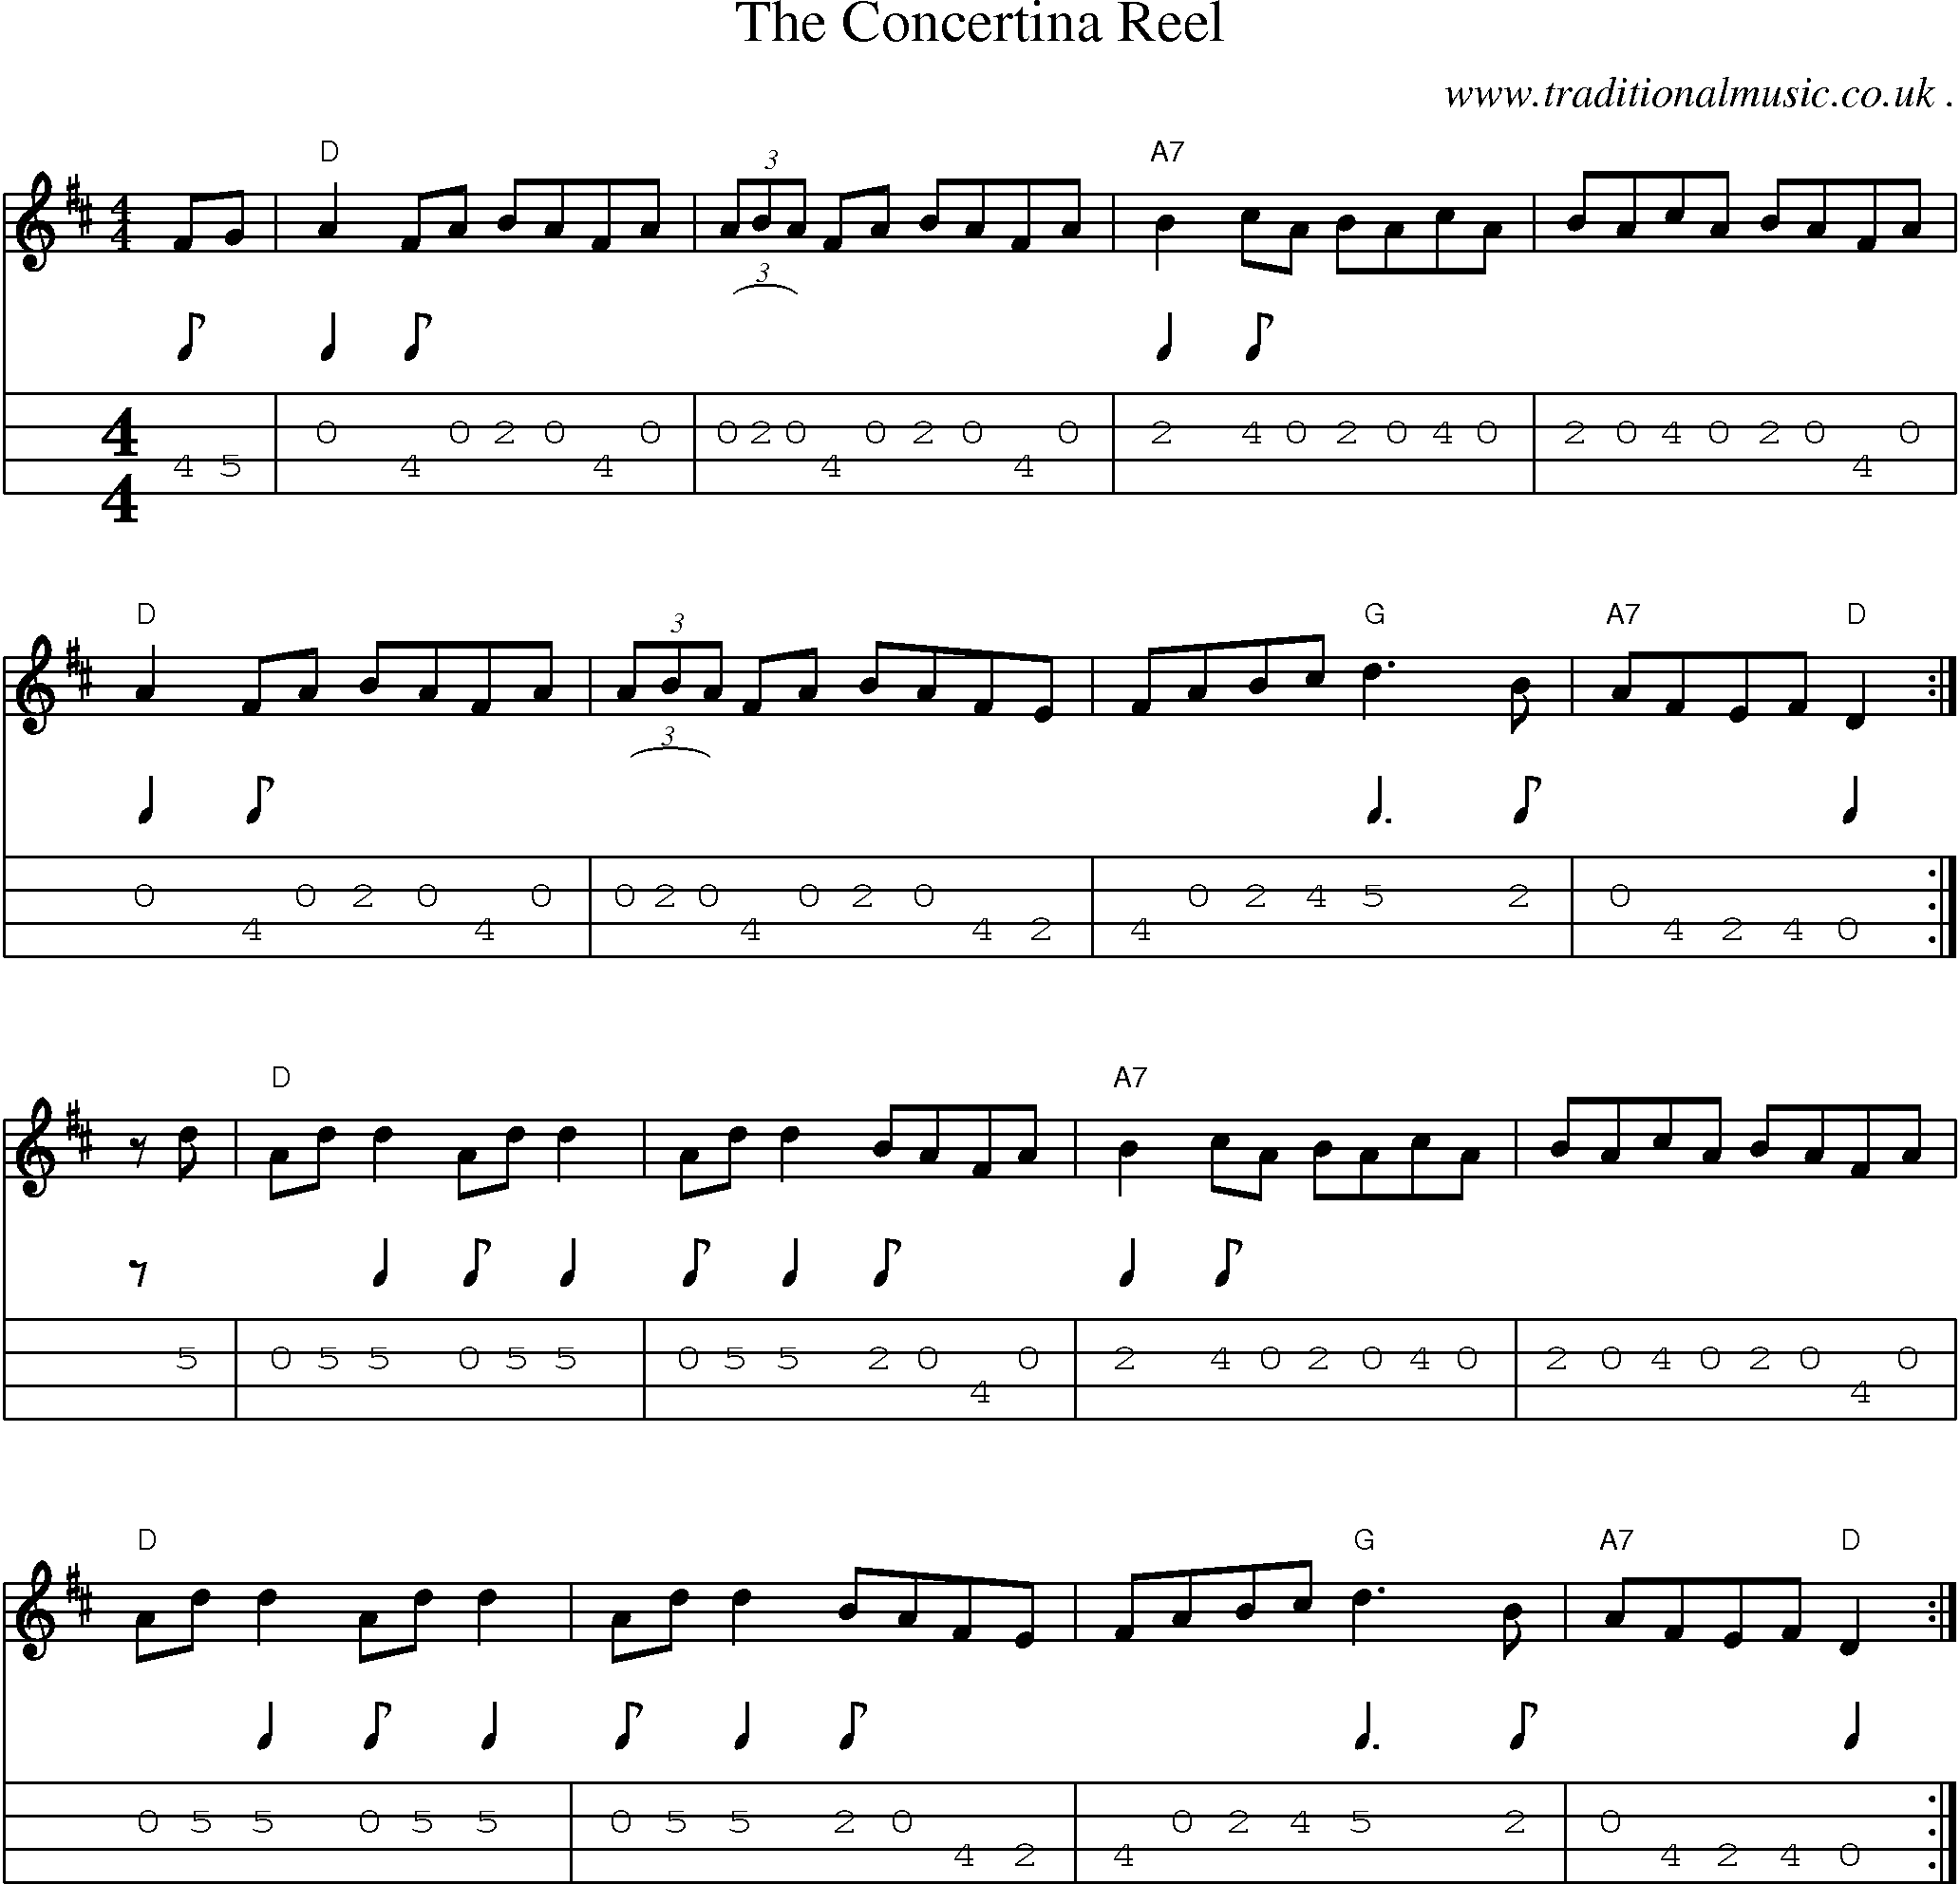 Sheet-music  score, Chords and Mandolin Tabs for The Concertina Reel